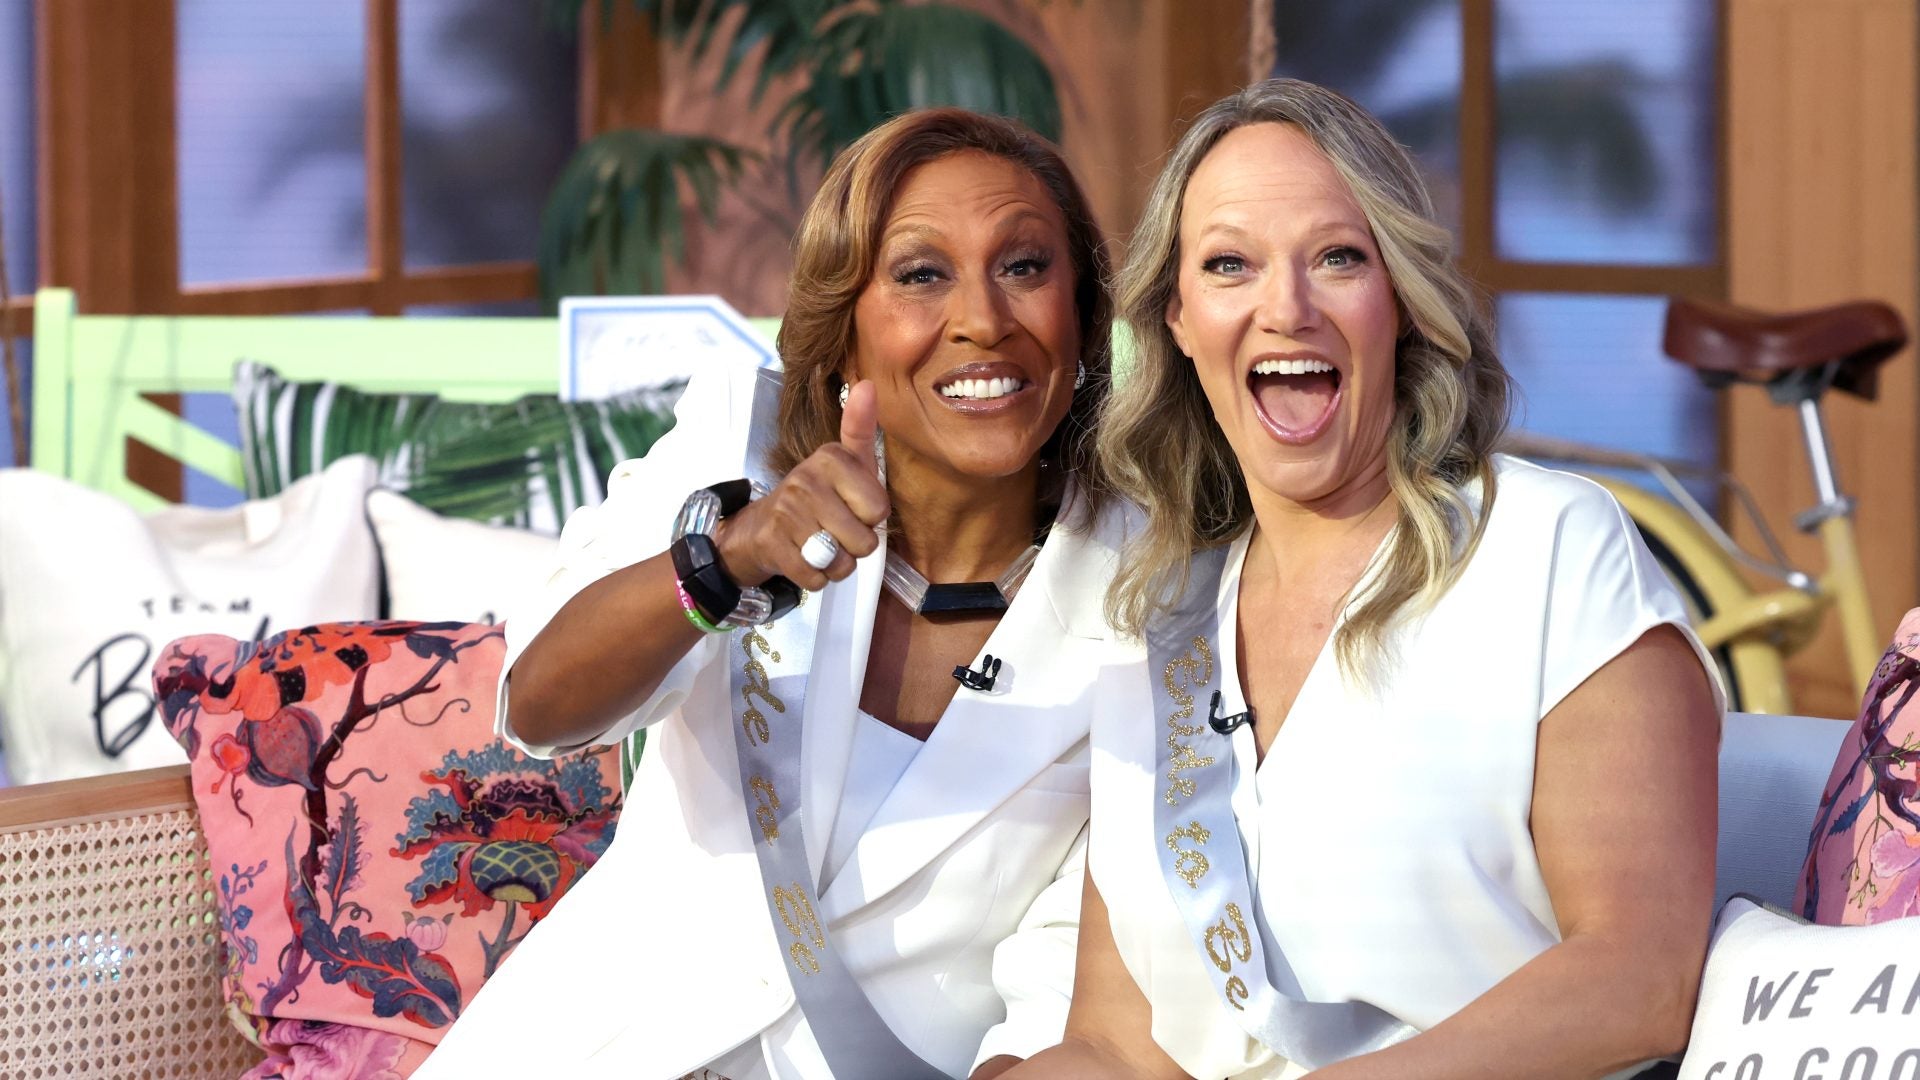 Robin Roberts And Fiancée Amber Laign Had A Joint Bachelorette Party Live On 'Good Morning America'